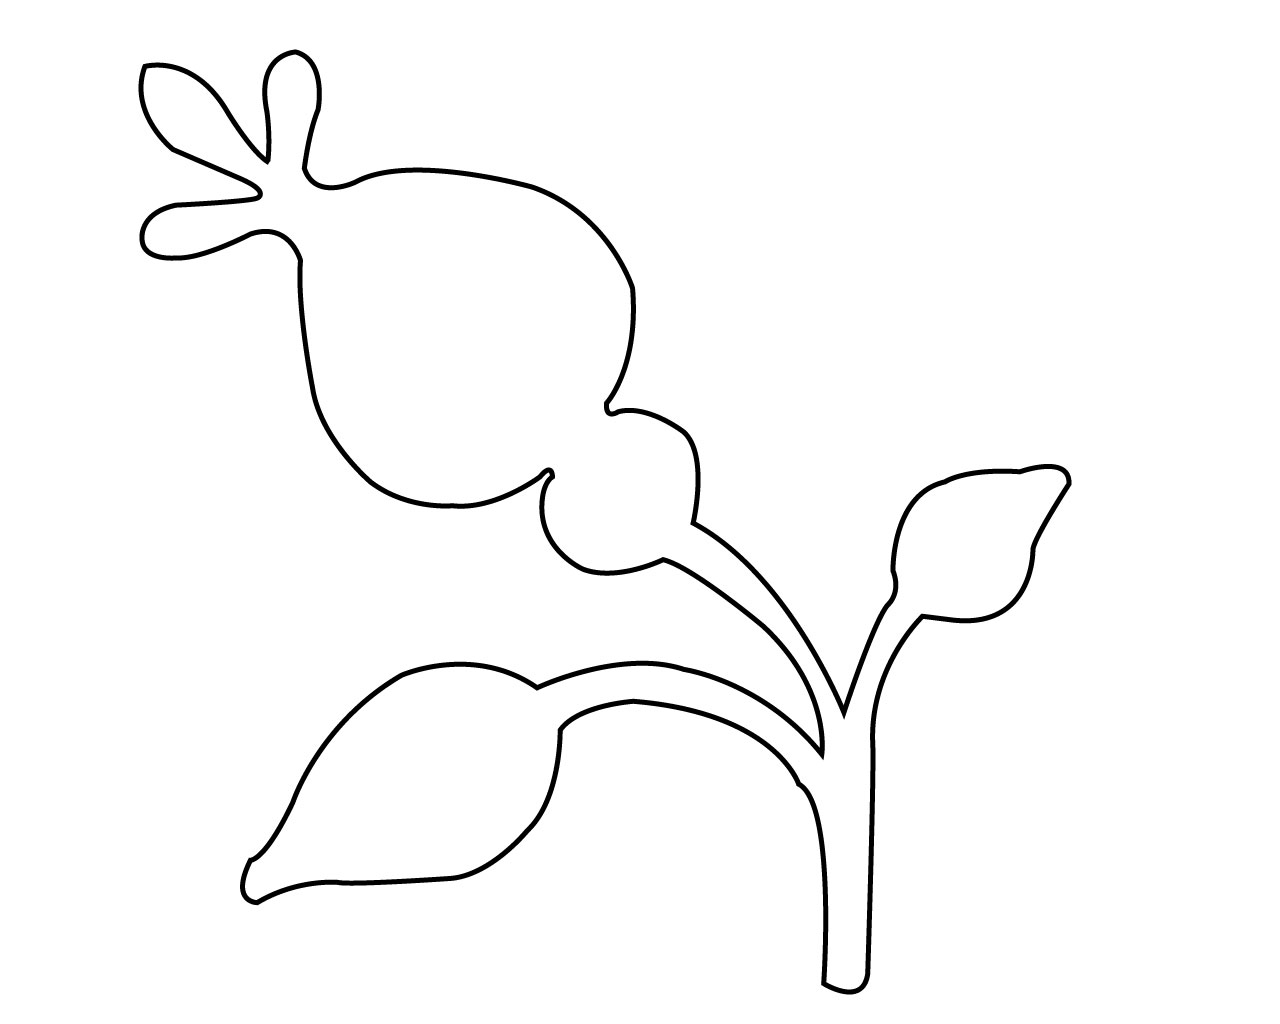 Simple Flower Coloring Pages For Kids   CareersPlay.com